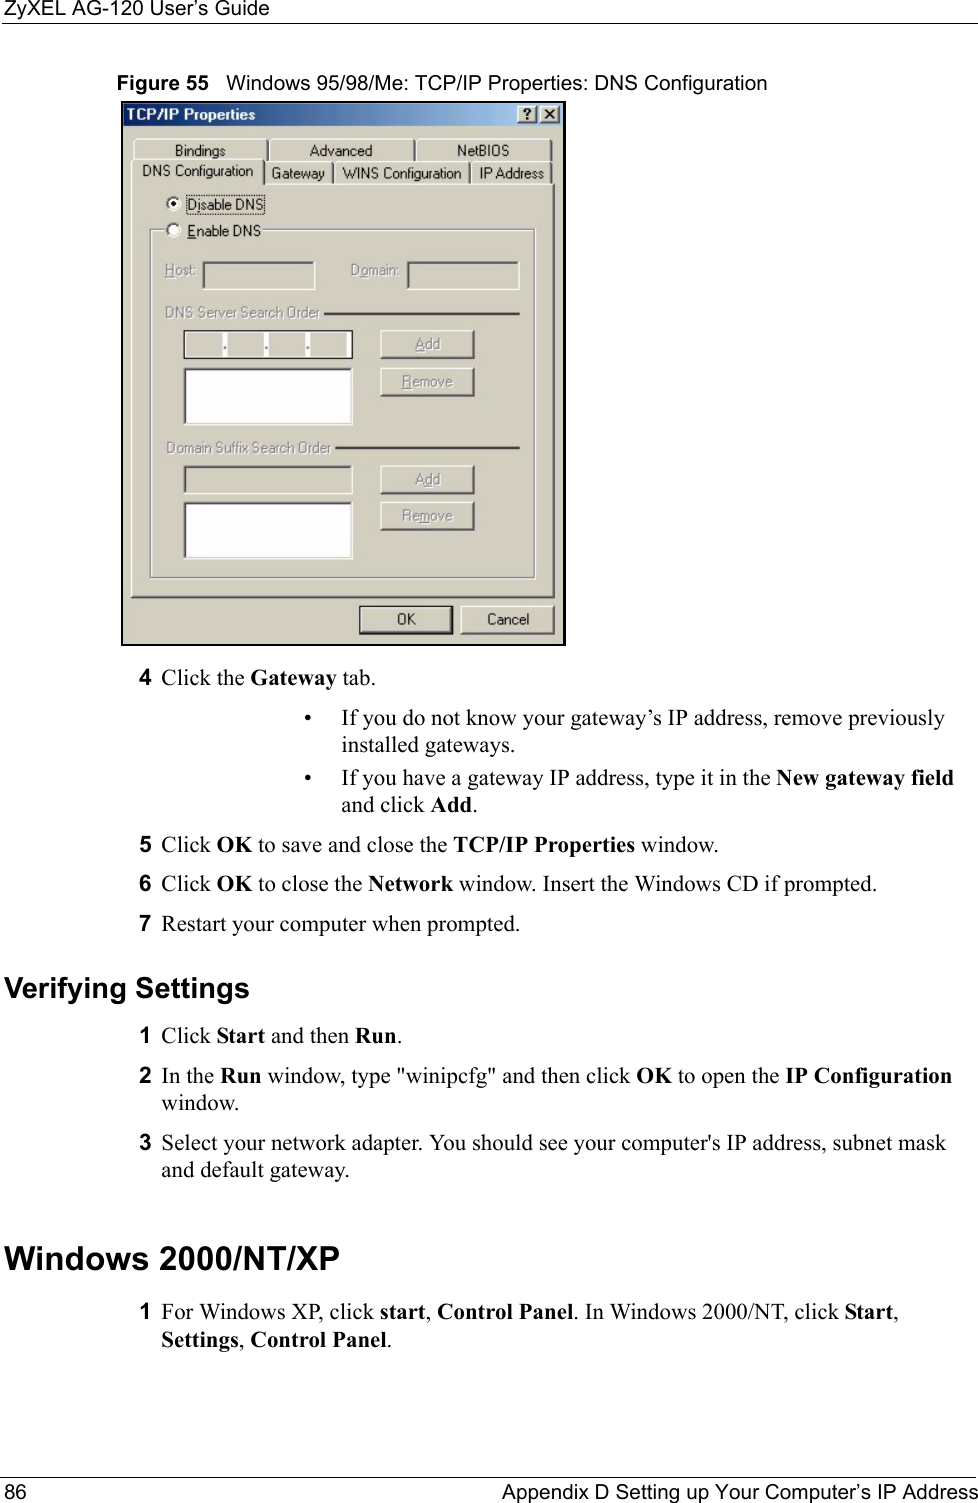 ZyXEL AG-120 User’s Guide86 Appendix D Setting up Your Computer’s IP AddressFigure 55   Windows 95/98/Me: TCP/IP Properties: DNS Configuration4Click the Gateway tab.• If you do not know your gateway’s IP address, remove previously installed gateways.• If you have a gateway IP address, type it in the New gateway field and click Add.5Click OK to save and close the TCP/IP Properties window.6Click OK to close the Network window. Insert the Windows CD if prompted.7Restart your computer when prompted.Verifying Settings1Click Start and then Run.2In the Run window, type &quot;winipcfg&quot; and then click OK to open the IP Configuration window.3Select your network adapter. You should see your computer&apos;s IP address, subnet mask and default gateway.Windows 2000/NT/XP1For Windows XP, click start, Control Panel. In Windows 2000/NT, click Start, Settings, Control Panel.